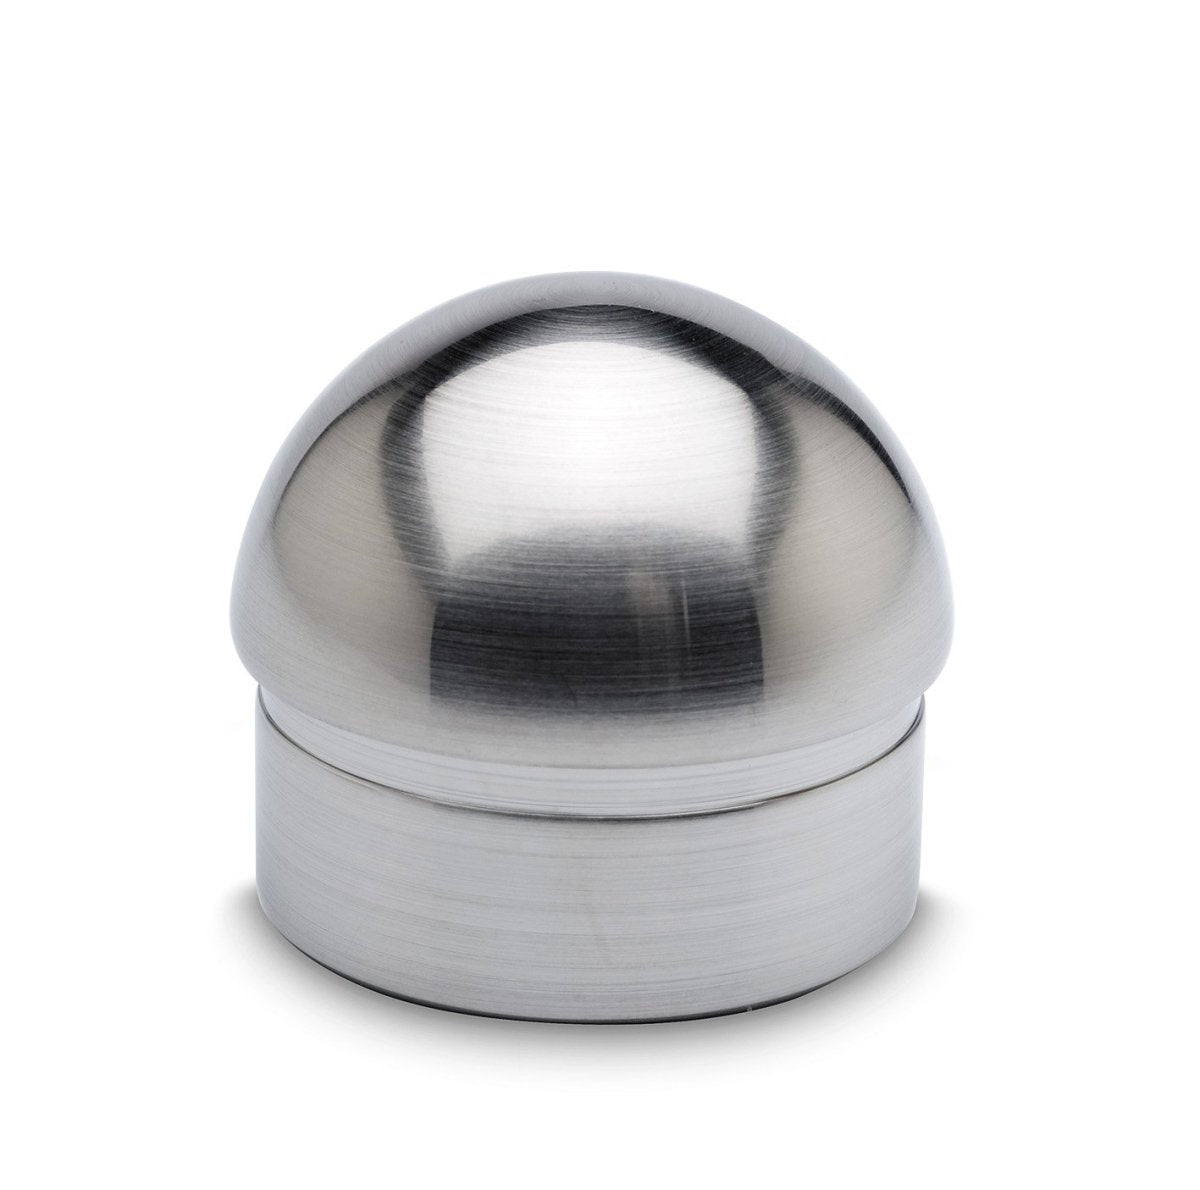 Domed End Cap - Oxford Hardware - 11.0730.038.20